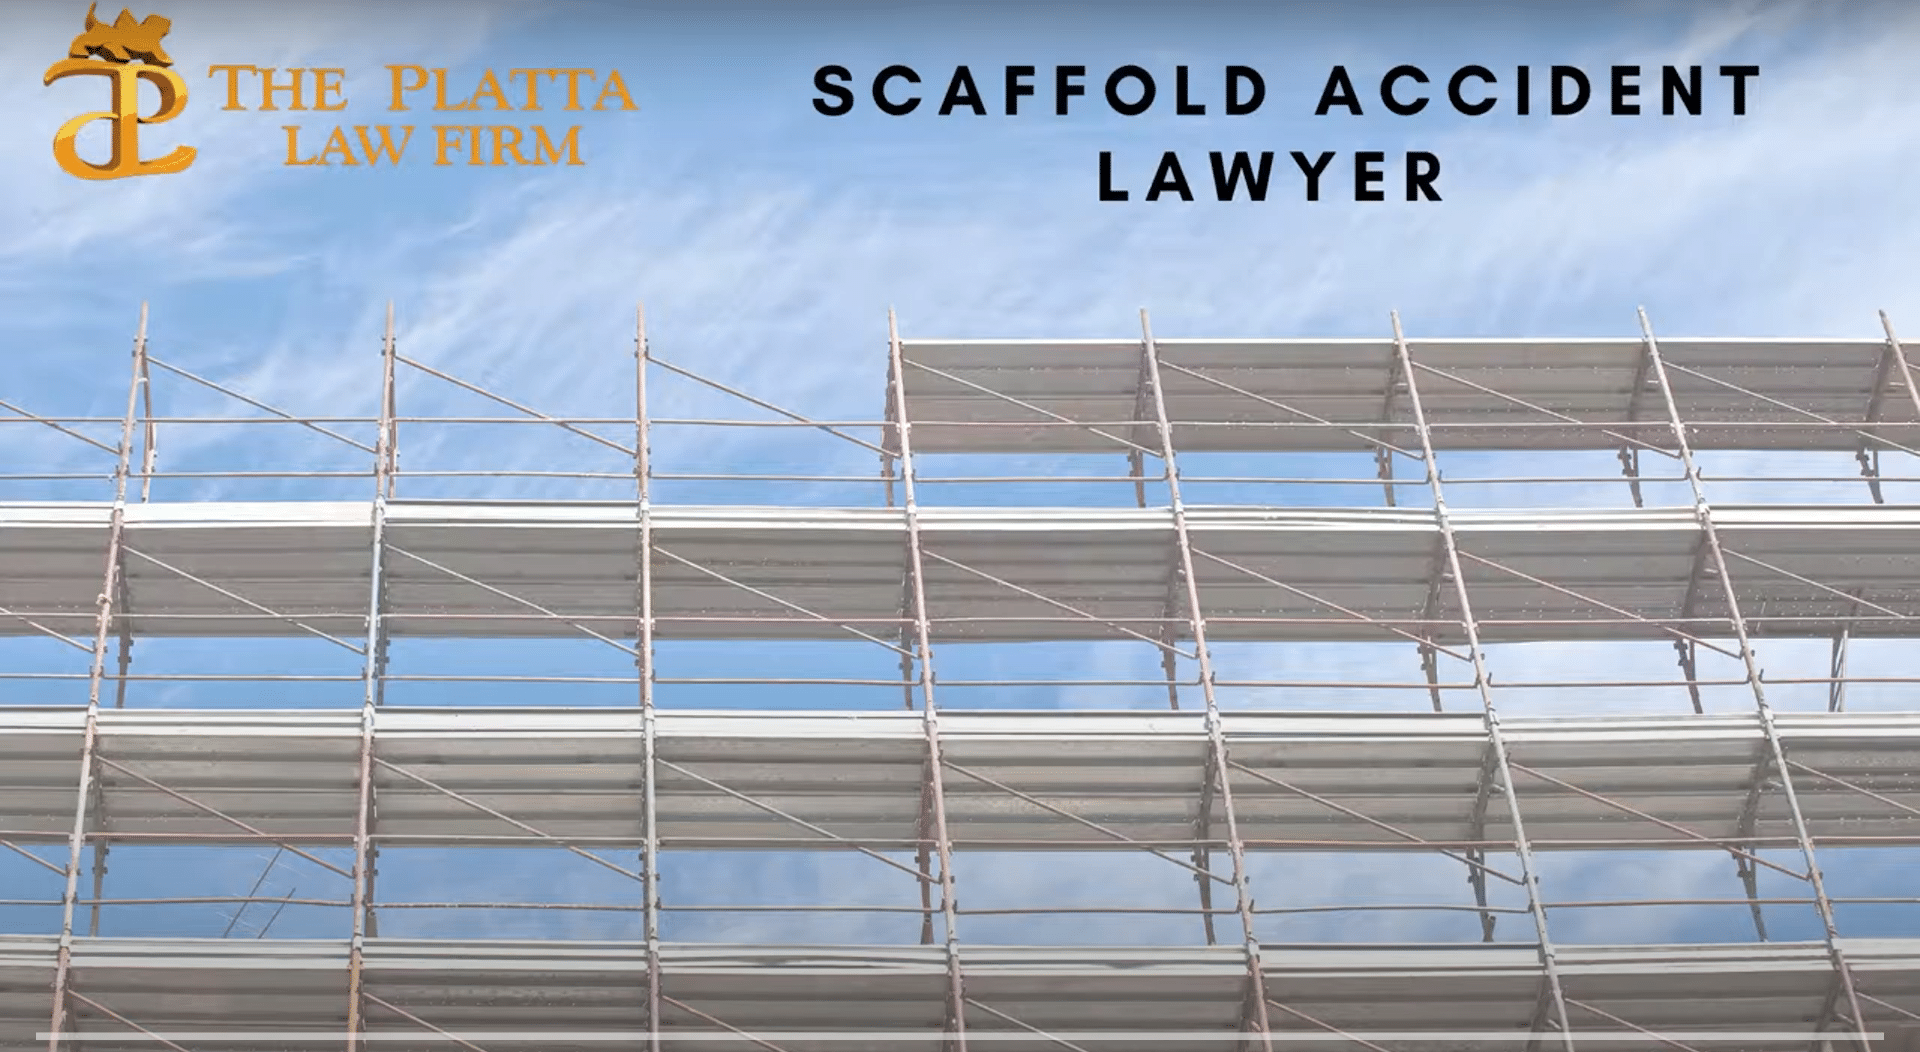 NEW YORK SCAFFOLDING ACCIDENT LAWYER